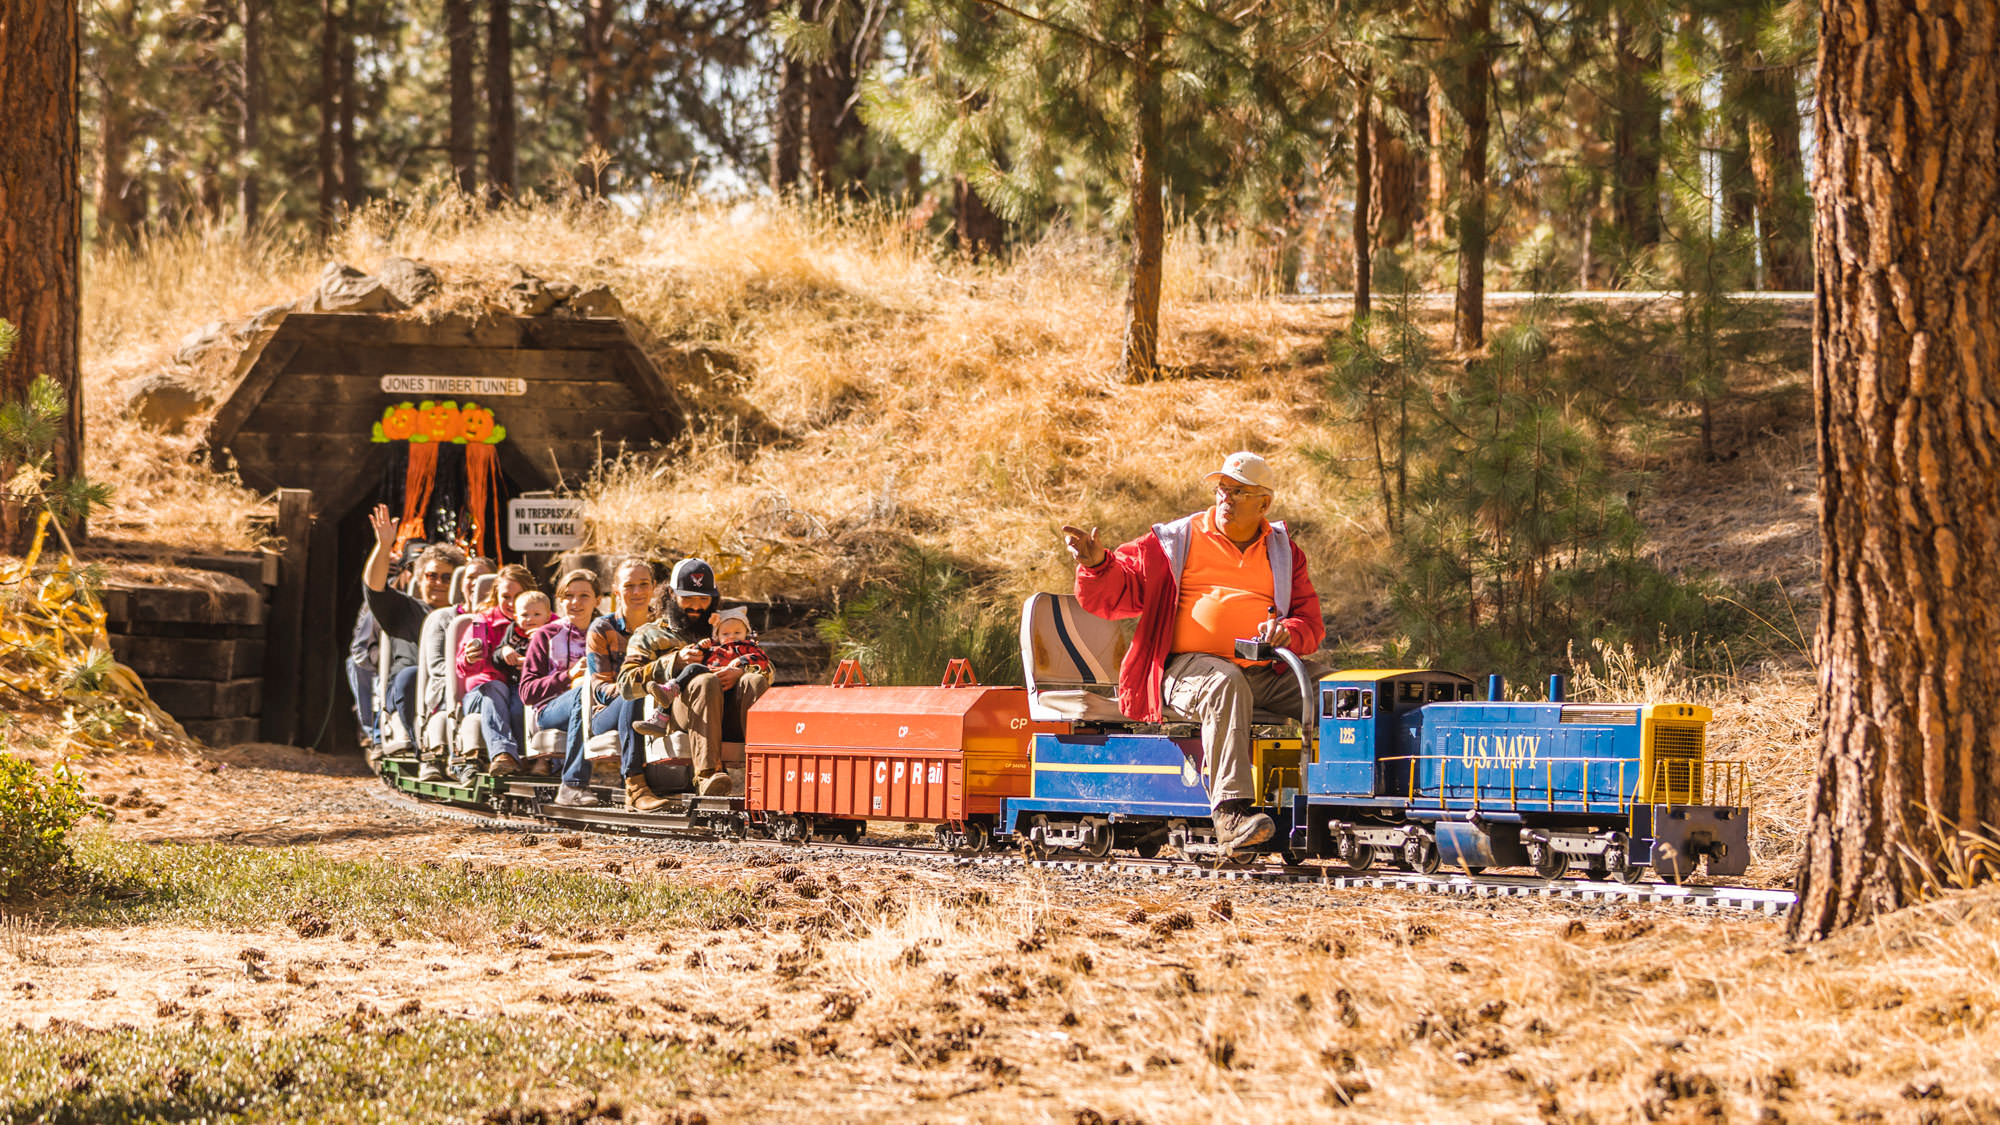 People smile and wave as they sit atop miniature train compartments after leaving a tunnel.